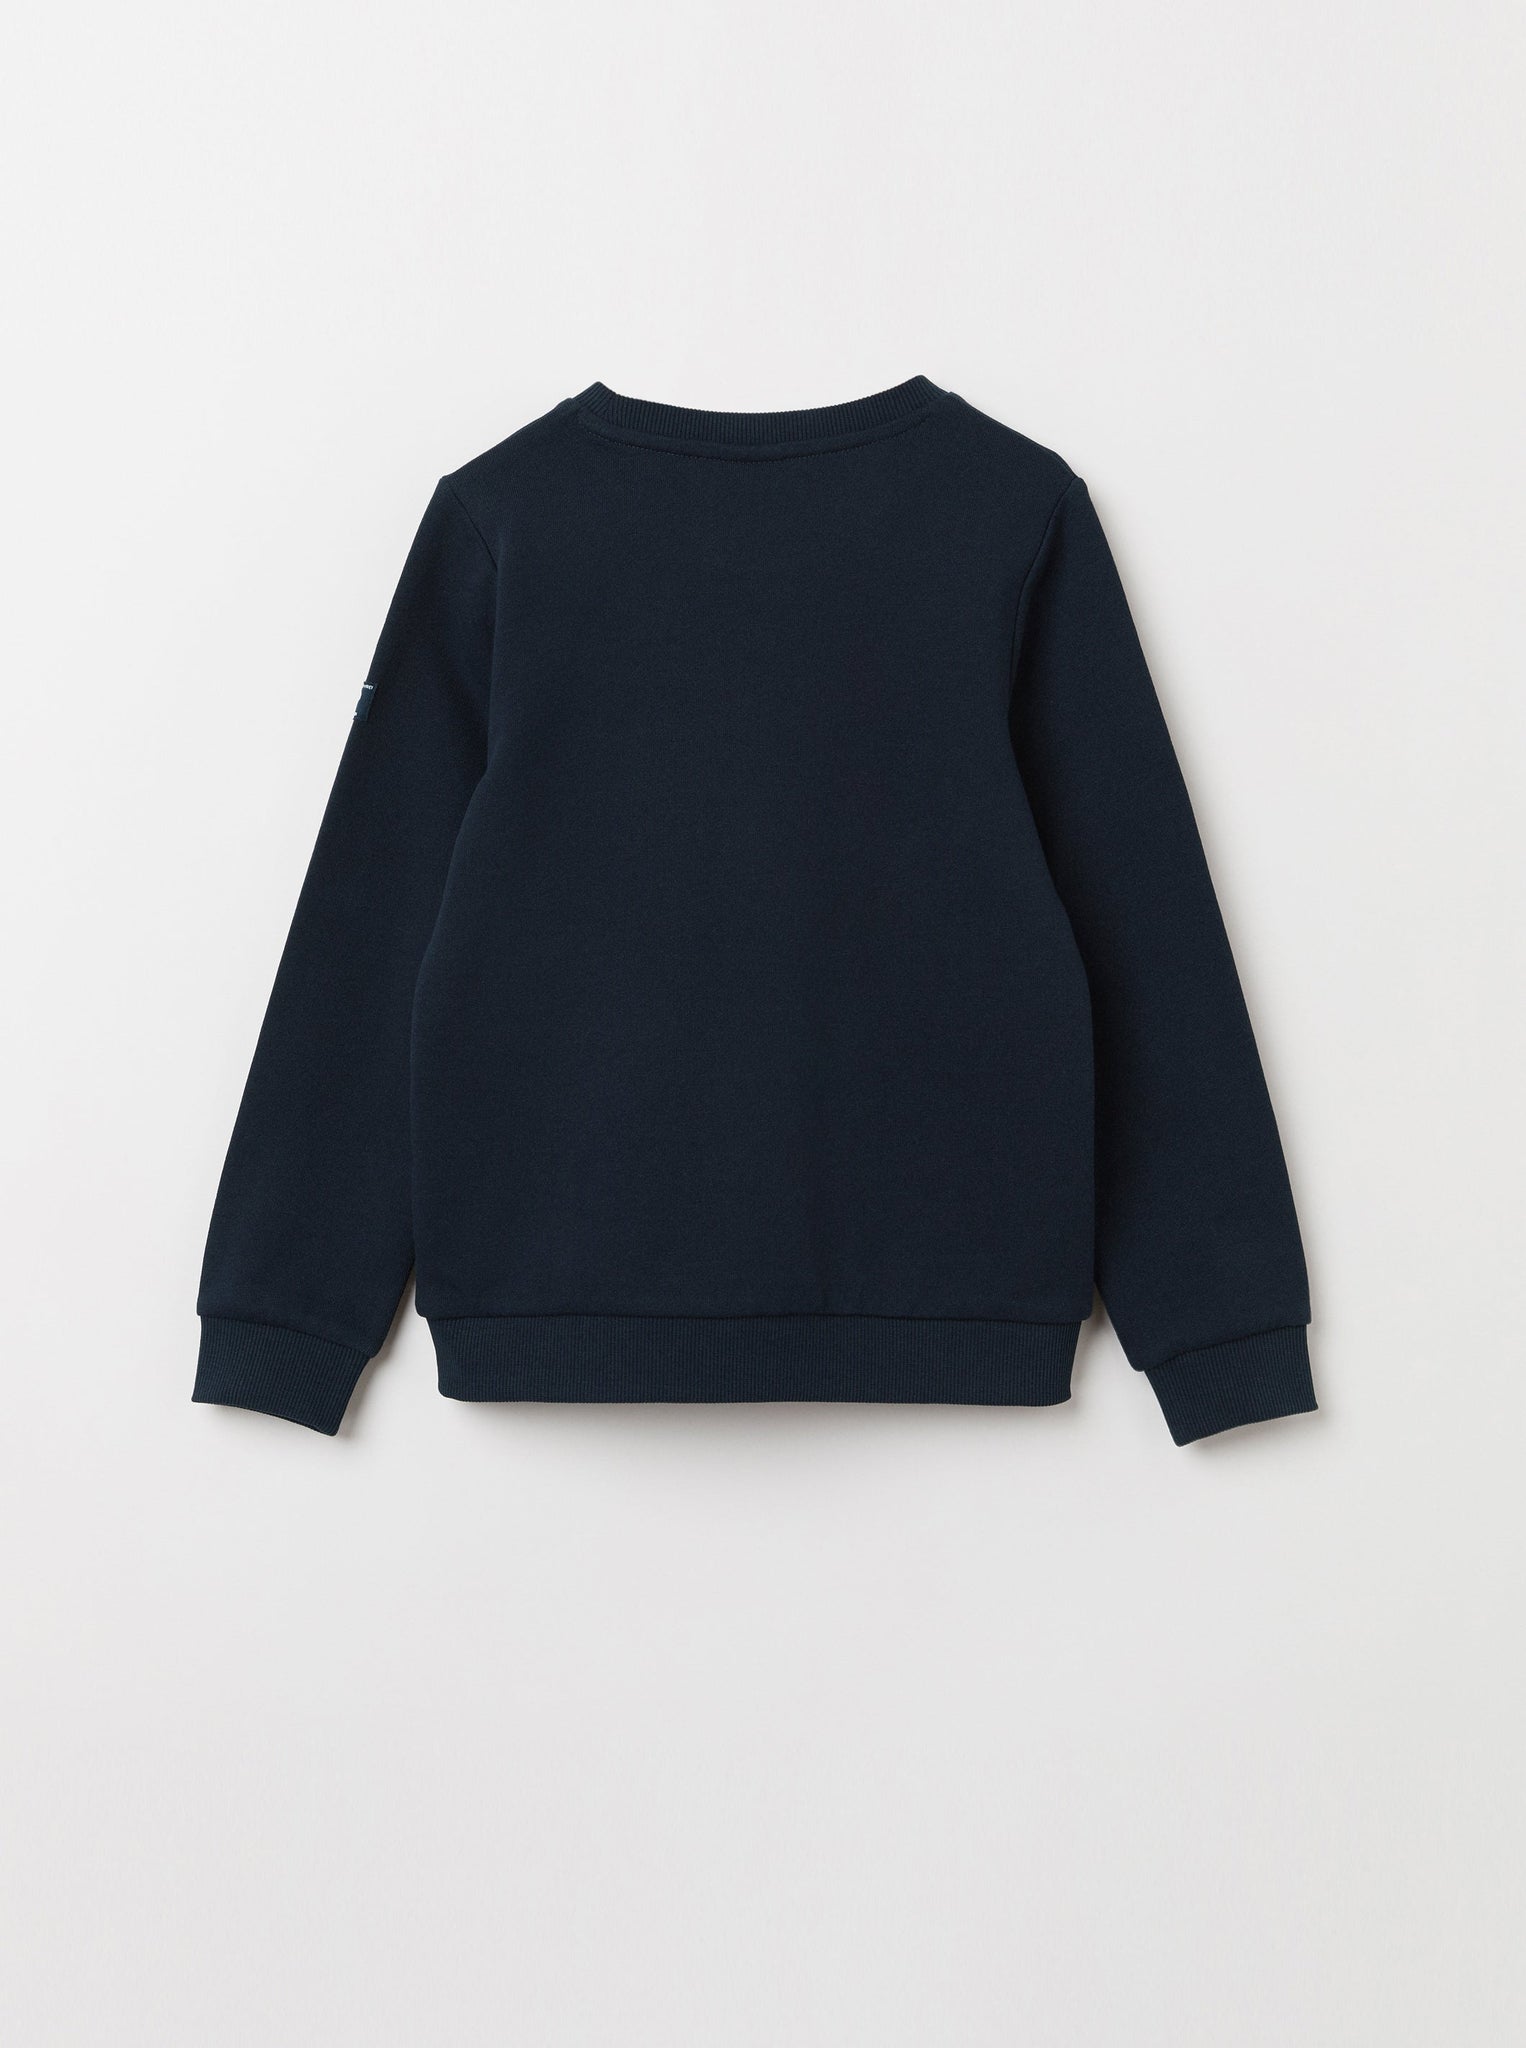 Car Print Navy Kids Sweatshirt from the Polarn O. Pyret Kidswear collection. Clothes made using sustainably sourced materials.